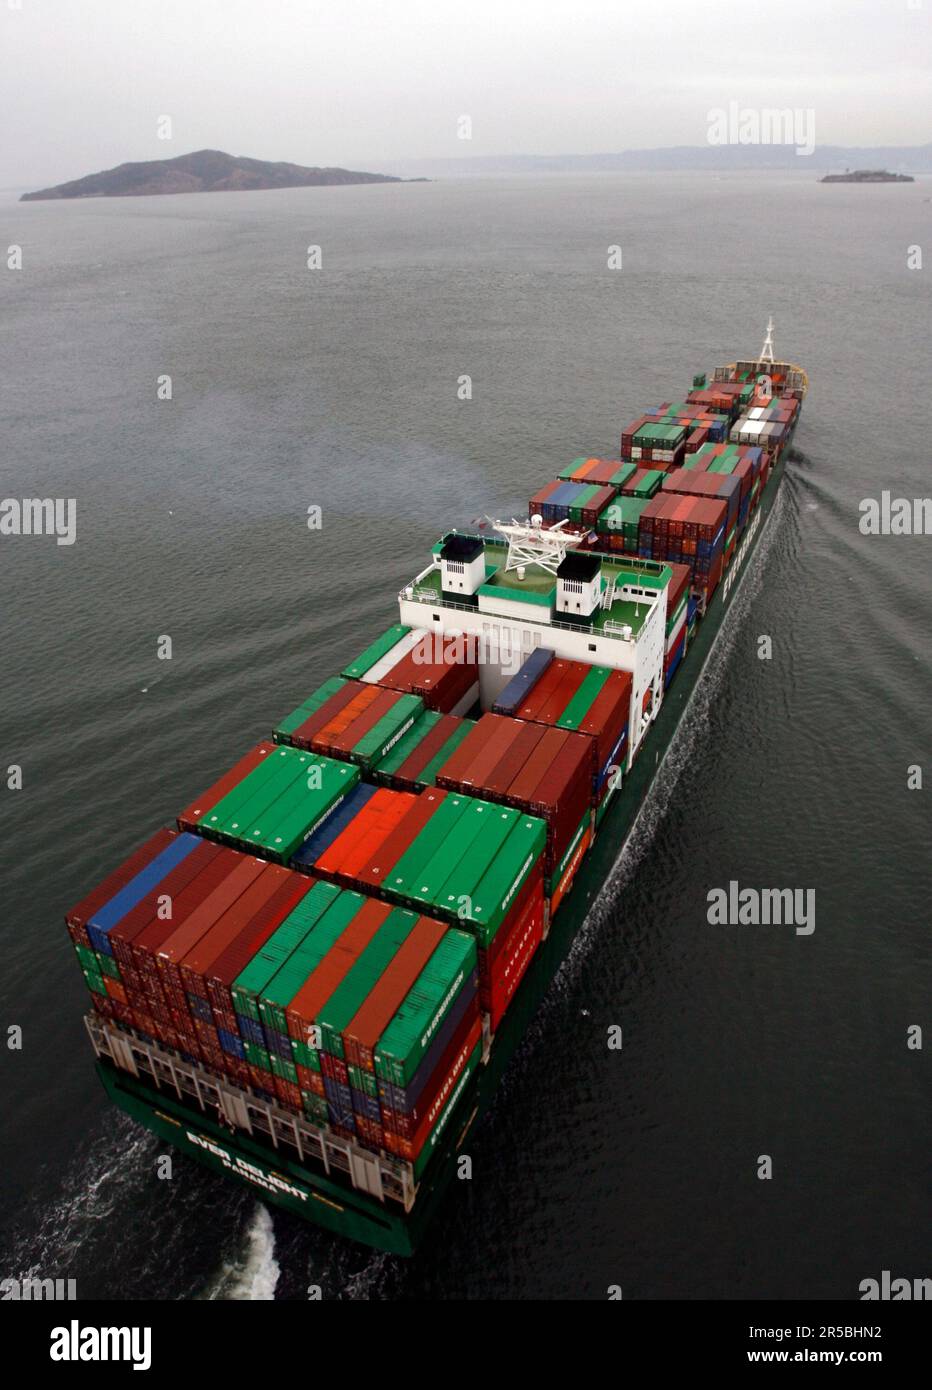 https://c8.alamy.com/comp/2R5BHN2/a-container-ship-steams-under-the-golden-gate-bridge-and-into-the-bay-on-its-way-to-port-in-san-francisco-calif-on-wednesday-oct-4-2006-maersk-shipping-lines-announced-last-may-that-it-was-switching-to-a-less-polluting-low-sulphur-fuel-on-all-of-it-ships-that-dock-in-california-the-ship-that-arrived-wednesday-afternoon-is-not-a-maersk-line-vessel-paul-chinnthe-chronicle-ran-on-10-05-2006-eugene-pentimonti-maersks-senior-vice-president-of-government-relations-stands-on-a-crane-in-oakland-a-container-ship-steams-under-the-golden-gate-bridge-and-into-the-bay-on-its-way-to-port-in-2R5BHN2.jpg